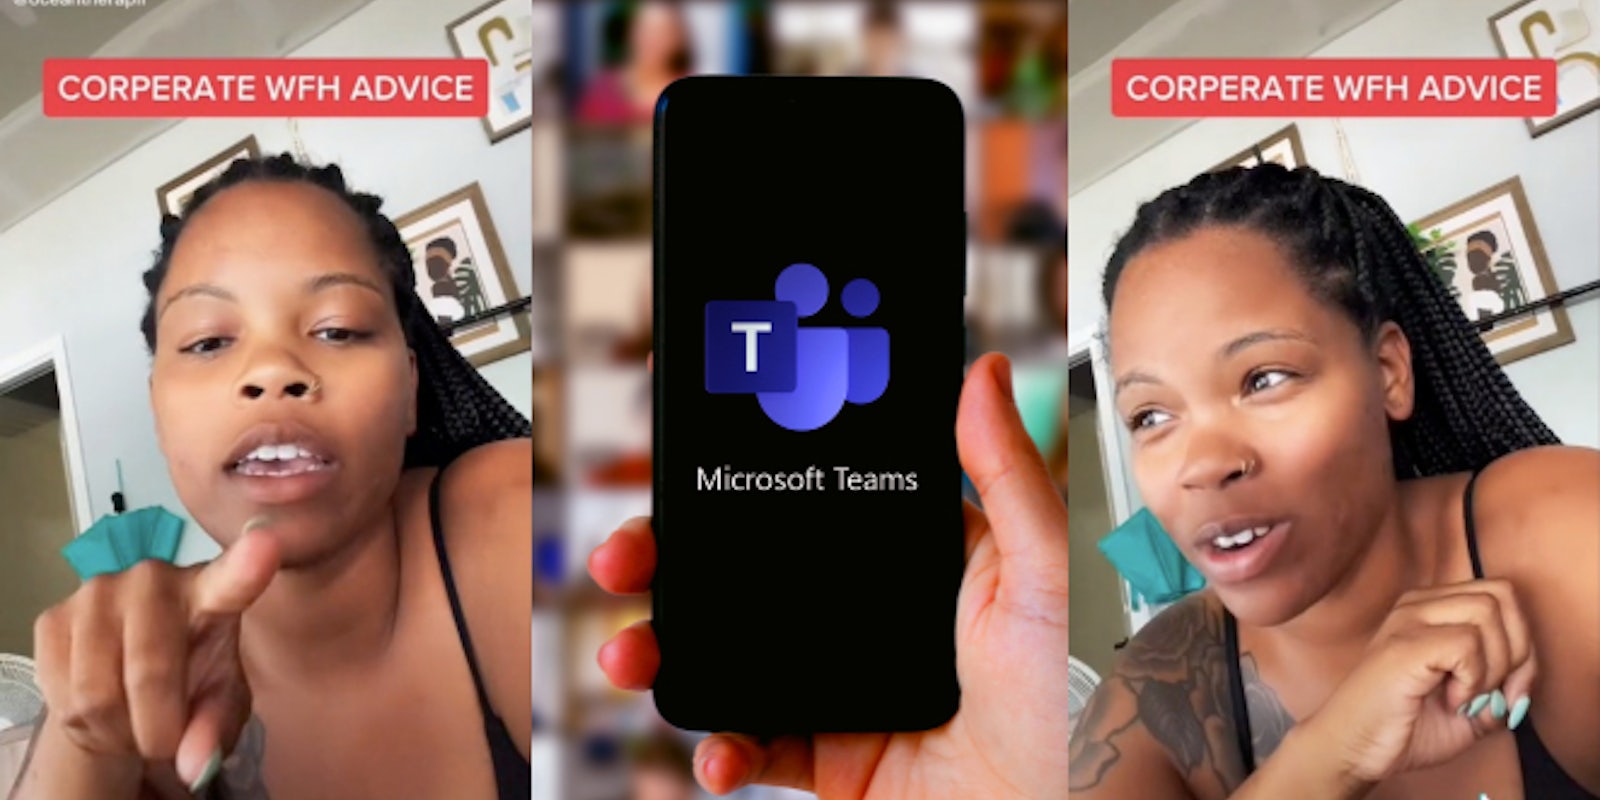 woman speaking pointing finger caption 'CORPORATE WFH ADVICE' (l) hand holding Microsoft Teams on phone in front of meeting (c)woman speaking caption 'CORPORATE WFH ADVICE' (r)